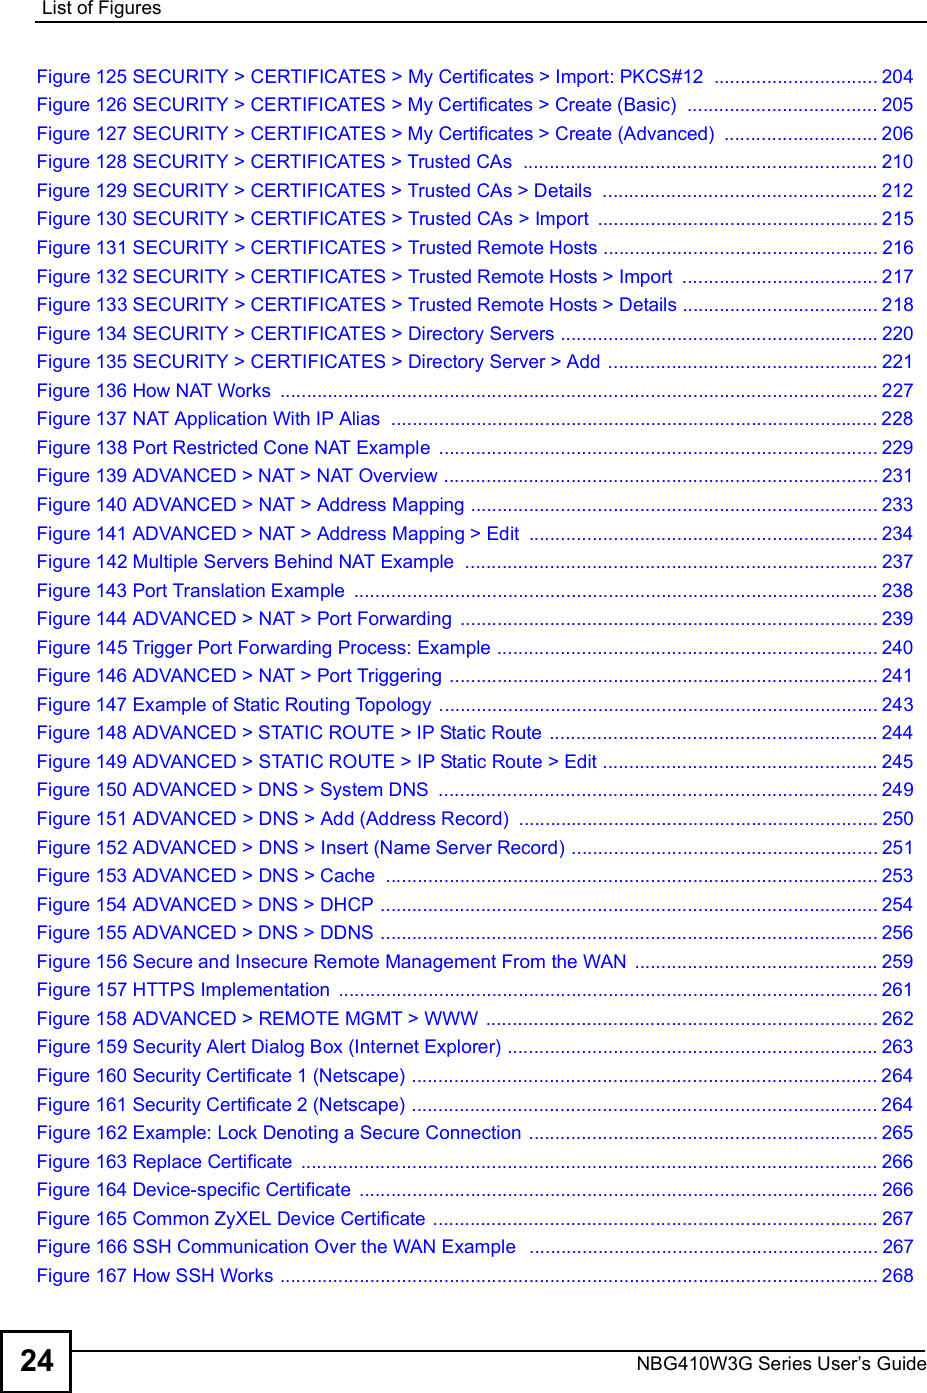 List of FiguresNBG410W3G Series User s Guide24Figure 125 SECURITY &gt; CERTIFICATES &gt; My Certificates &gt; Import: PKCS#12 ...............................204Figure 126 SECURITY &gt; CERTIFICATES &gt; My Certificates &gt; Create (Basic) ....................................205Figure 127 SECURITY &gt; CERTIFICATES &gt; My Certificates &gt; Create (Advanced) .............................206Figure 128 SECURITY &gt; CERTIFICATES &gt; Trusted CAs ...................................................................210Figure 129 SECURITY &gt; CERTIFICATES &gt; Trusted CAs &gt; Details ....................................................212Figure 130 SECURITY &gt; CERTIFICATES &gt; Trusted CAs &gt; Import .....................................................215Figure 131 SECURITY &gt; CERTIFICATES &gt; Trusted Remote Hosts ....................................................216Figure 132 SECURITY &gt; CERTIFICATES &gt; Trusted Remote Hosts &gt; Import .....................................217Figure 133 SECURITY &gt; CERTIFICATES &gt; Trusted Remote Hosts &gt; Details .....................................218Figure 134 SECURITY &gt; CERTIFICATES &gt; Directory Servers ............................................................220Figure 135 SECURITY &gt; CERTIFICATES &gt; Directory Server &gt; Add ...................................................221Figure 136 How NAT Works .................................................................................................................227Figure 137 NAT Application With IP Alias ............................................................................................228Figure 138 Port Restricted Cone NAT Example ...................................................................................229Figure 139 ADVANCED &gt; NAT &gt; NAT Overview ..................................................................................231Figure 140 ADVANCED &gt; NAT &gt; Address Mapping .............................................................................233Figure 141 ADVANCED &gt; NAT &gt; Address Mapping &gt; Edit ..................................................................234Figure 142 Multiple Servers Behind NAT Example ..............................................................................237Figure 143 Port Translation Example ...................................................................................................238Figure 144 ADVANCED &gt; NAT &gt; Port Forwarding ...............................................................................239Figure 145 Trigger Port Forwarding Process: Example ........................................................................240Figure 146 ADVANCED &gt; NAT &gt; Port Triggering .................................................................................241Figure 147 Example of Static Routing Topology ...................................................................................243Figure 148 ADVANCED &gt; STATIC ROUTE &gt; IP Static Route ..............................................................244Figure 149 ADVANCED &gt; STATIC ROUTE &gt; IP Static Route &gt; Edit ....................................................245Figure 150 ADVANCED &gt; DNS &gt; System DNS ...................................................................................249Figure 151 ADVANCED &gt; DNS &gt; Add (Address Record) ....................................................................250Figure 152 ADVANCED &gt; DNS &gt; Insert (Name Server Record) ..........................................................251Figure 153 ADVANCED &gt; DNS &gt; Cache .............................................................................................253Figure 154 ADVANCED &gt; DNS &gt; DHCP ..............................................................................................254Figure 155 ADVANCED &gt; DNS &gt; DDNS ..............................................................................................256Figure 156 Secure and Insecure Remote Management From the WAN ..............................................259Figure 157 HTTPS Implementation ......................................................................................................261Figure 158 ADVANCED &gt; REMOTE MGMT &gt; WWW ..........................................................................262Figure 159 Security Alert Dialog Box (Internet Explorer) ......................................................................263Figure 160 Security Certificate 1 (Netscape) ........................................................................................264Figure 161 Security Certificate 2 (Netscape) ........................................................................................264Figure 162 Example: Lock Denoting a Secure Connection ..................................................................265Figure 163 Replace Certificate .............................................................................................................266Figure 164 Device-specific Certificate ..................................................................................................266Figure 165 Common ZyXEL Device Certificate ....................................................................................267Figure 166 SSH Communication Over the WAN Example  ..................................................................267Figure 167 How SSH Works .................................................................................................................268